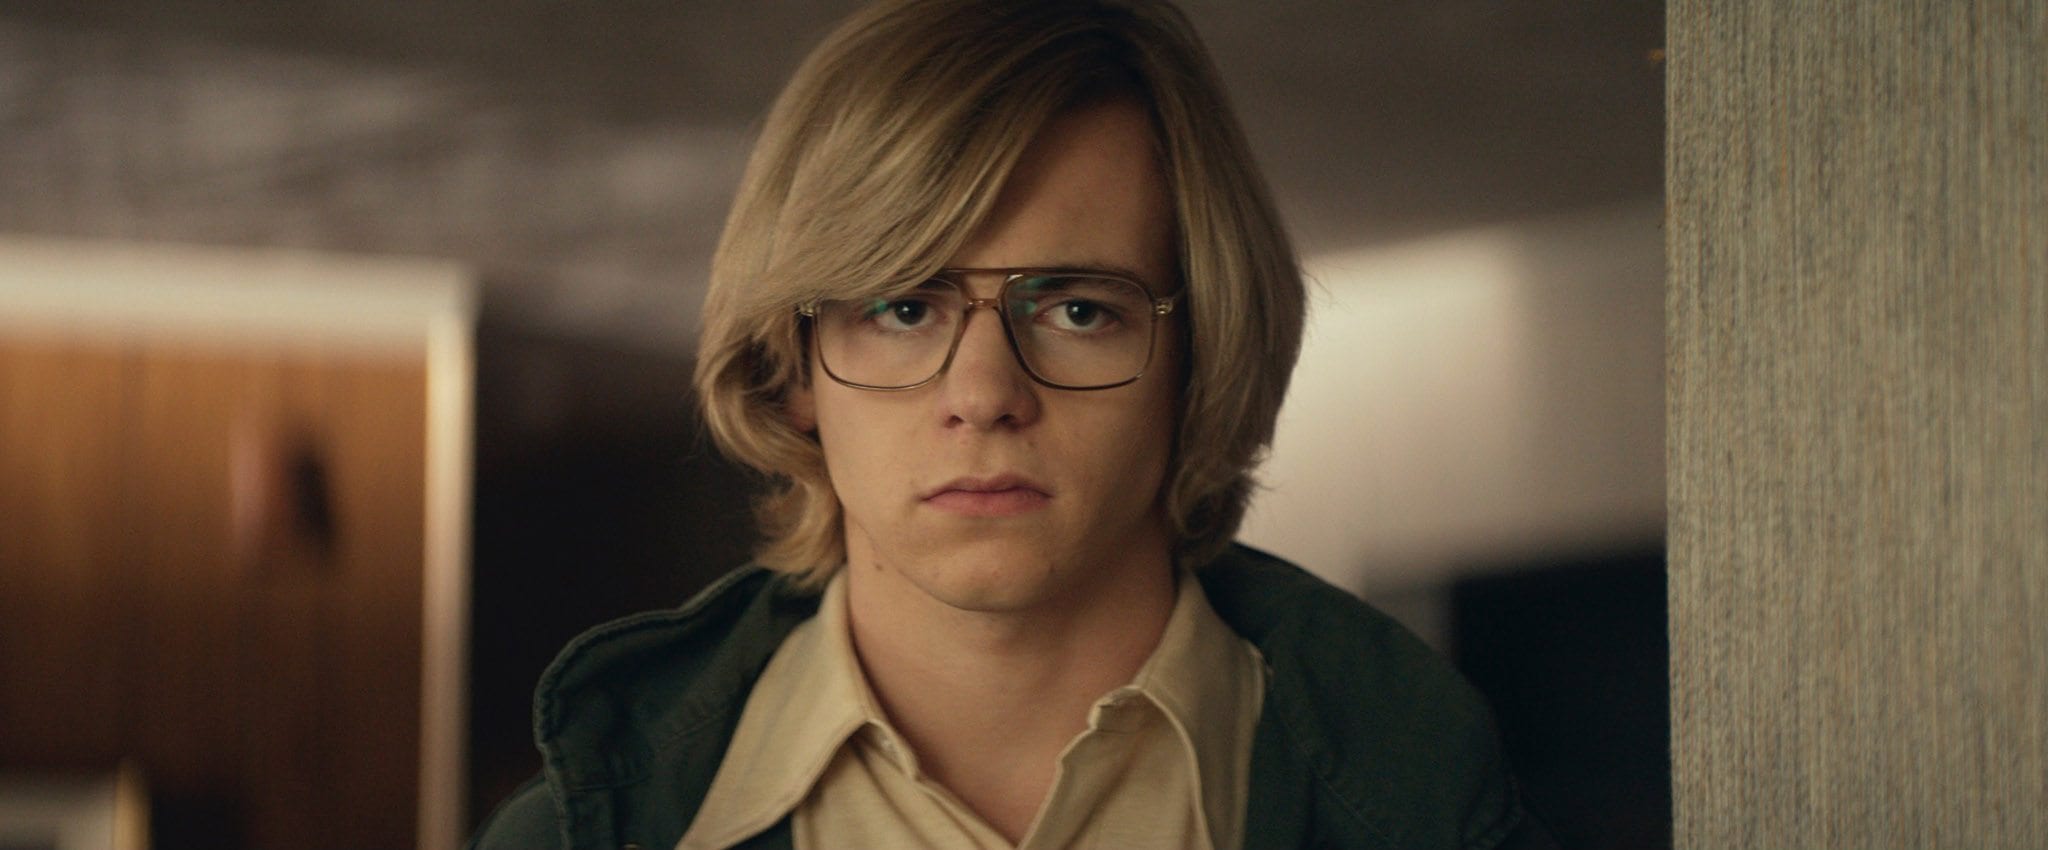 Directed by Marc Meyers, ‘My Friend Dahmer’ is a bleak coming-of-age story that delves into the early life of serial killer Jeffrey Dahmer.